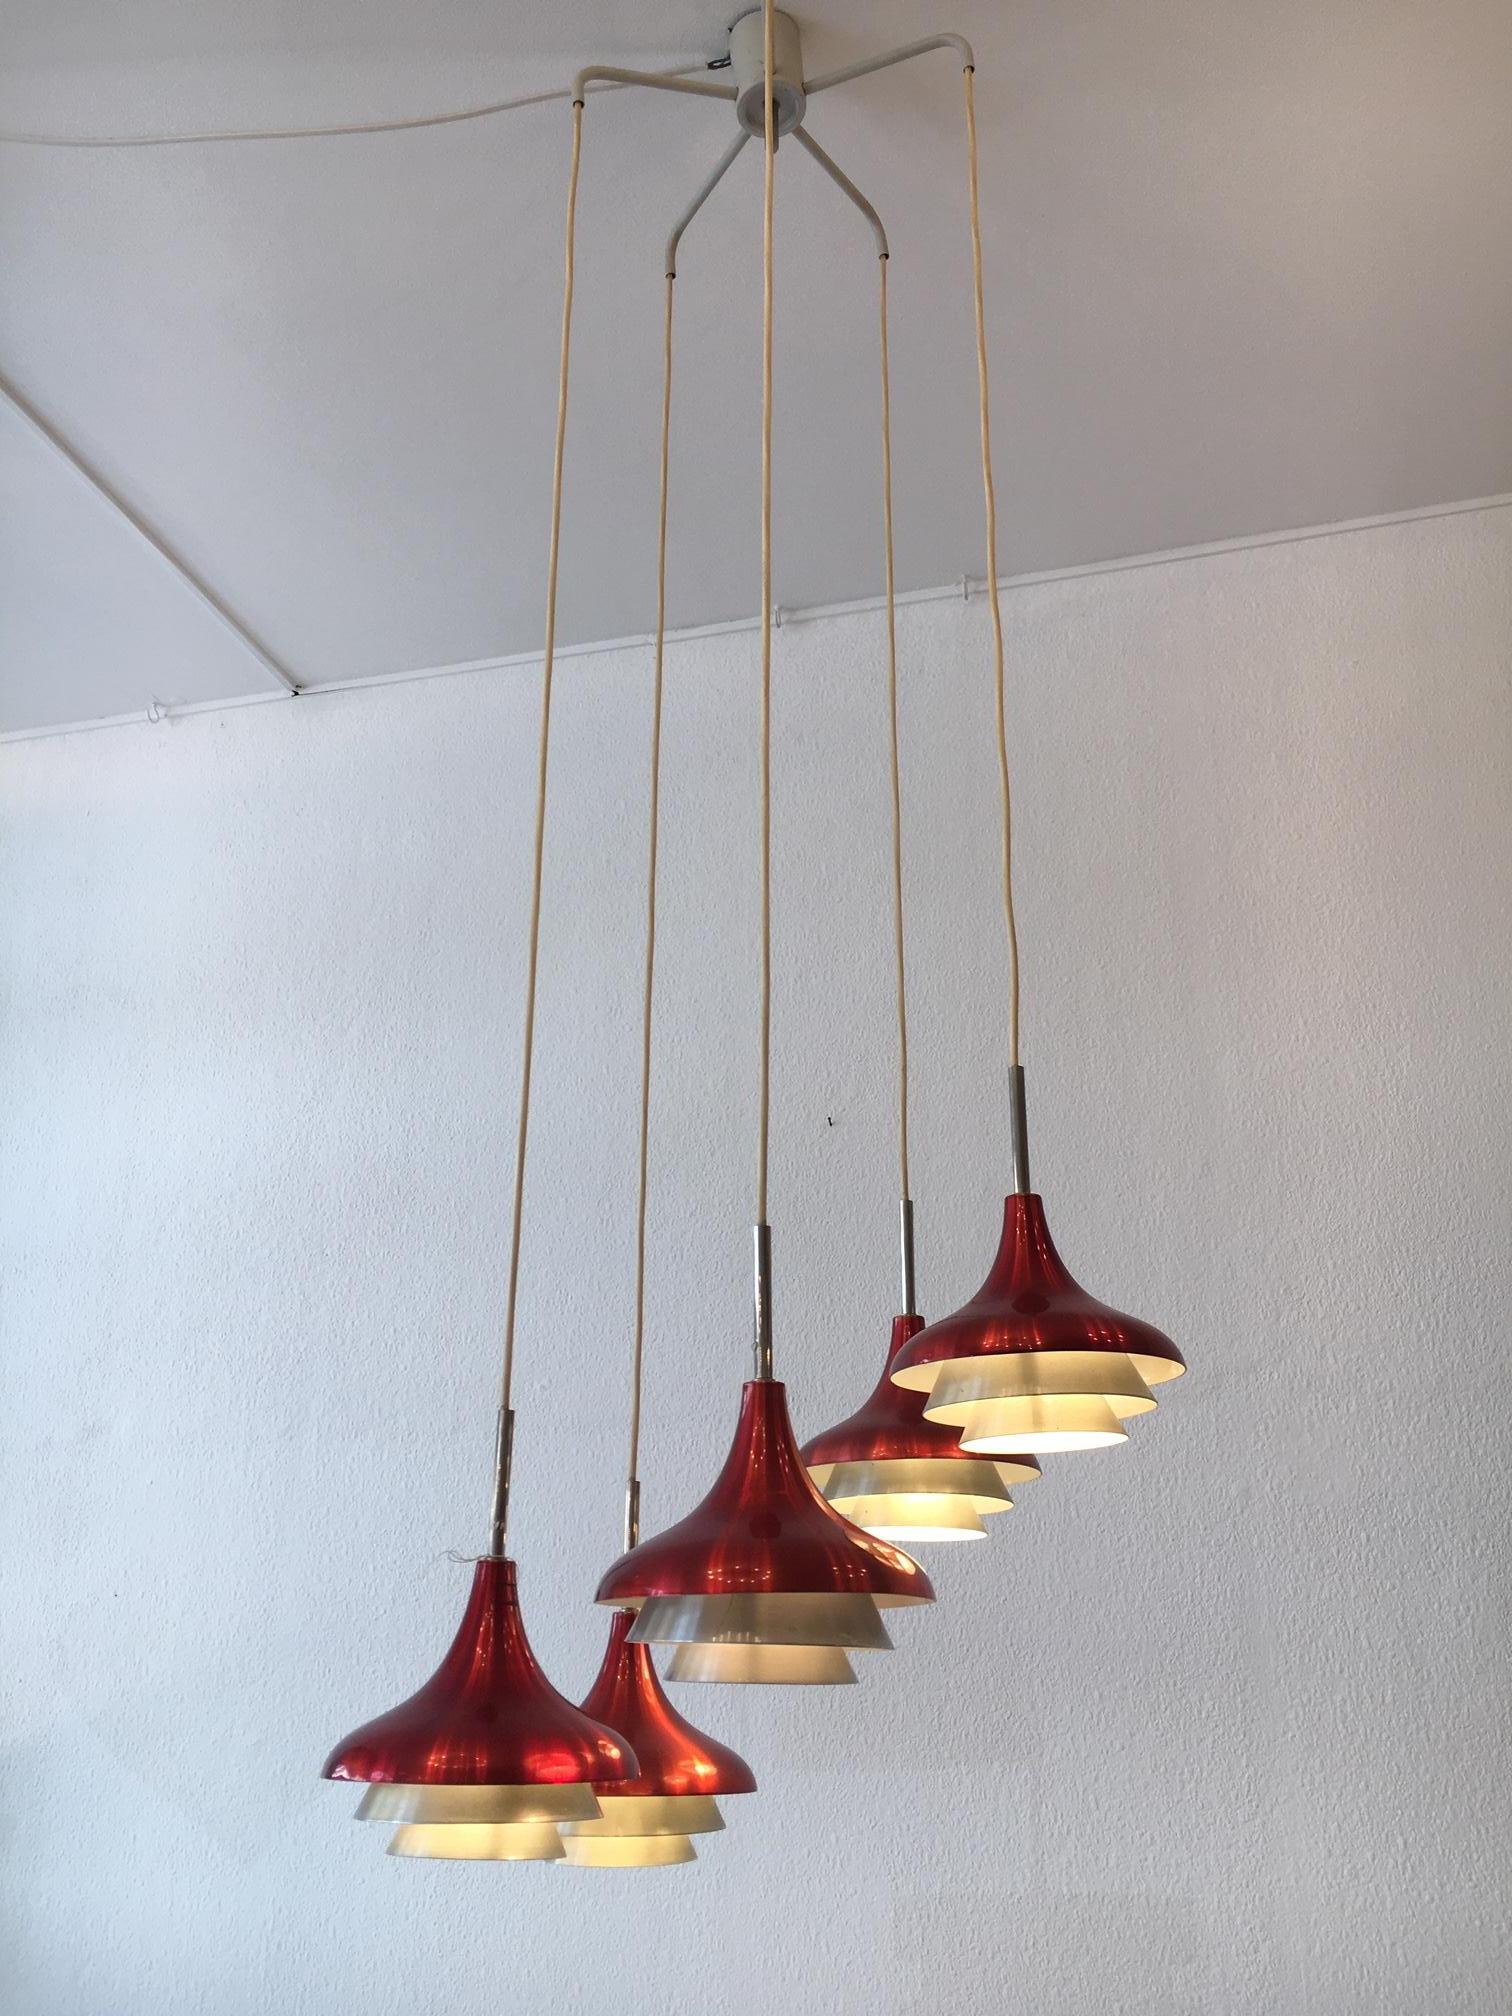 Aluminum and steel pendant lamp by Lyfa Denmark circa 1960s
5 lights, heights of each shade can be adjustable
Good vintage condition
Electrification ok for US.